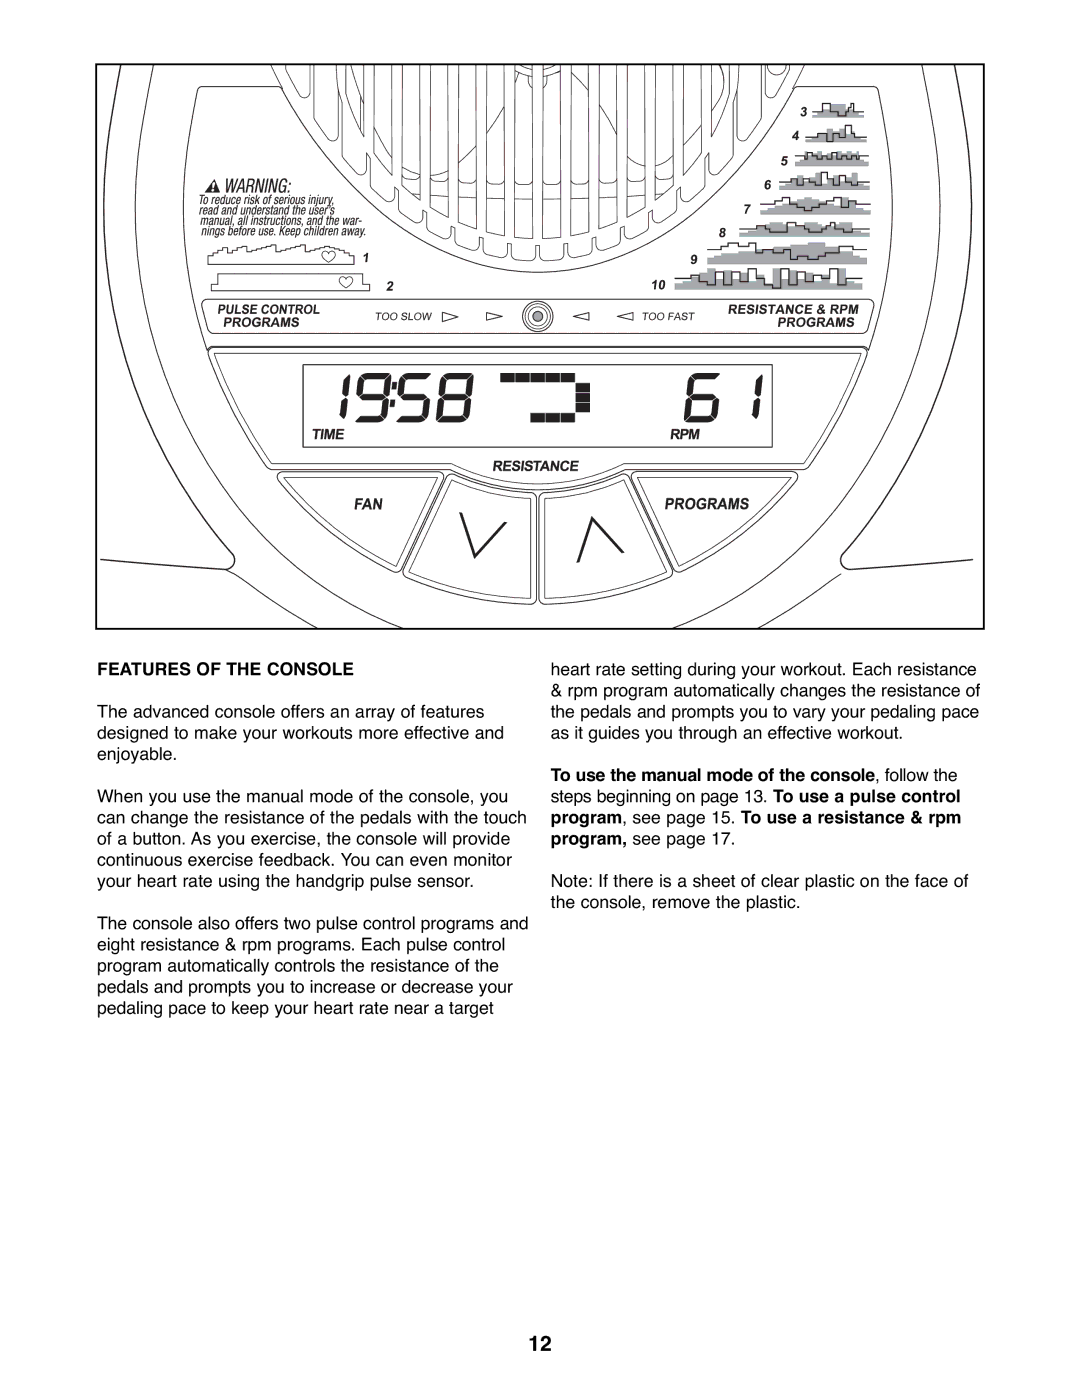 ProForm PFEL6026.0 user manual Features of the Console 